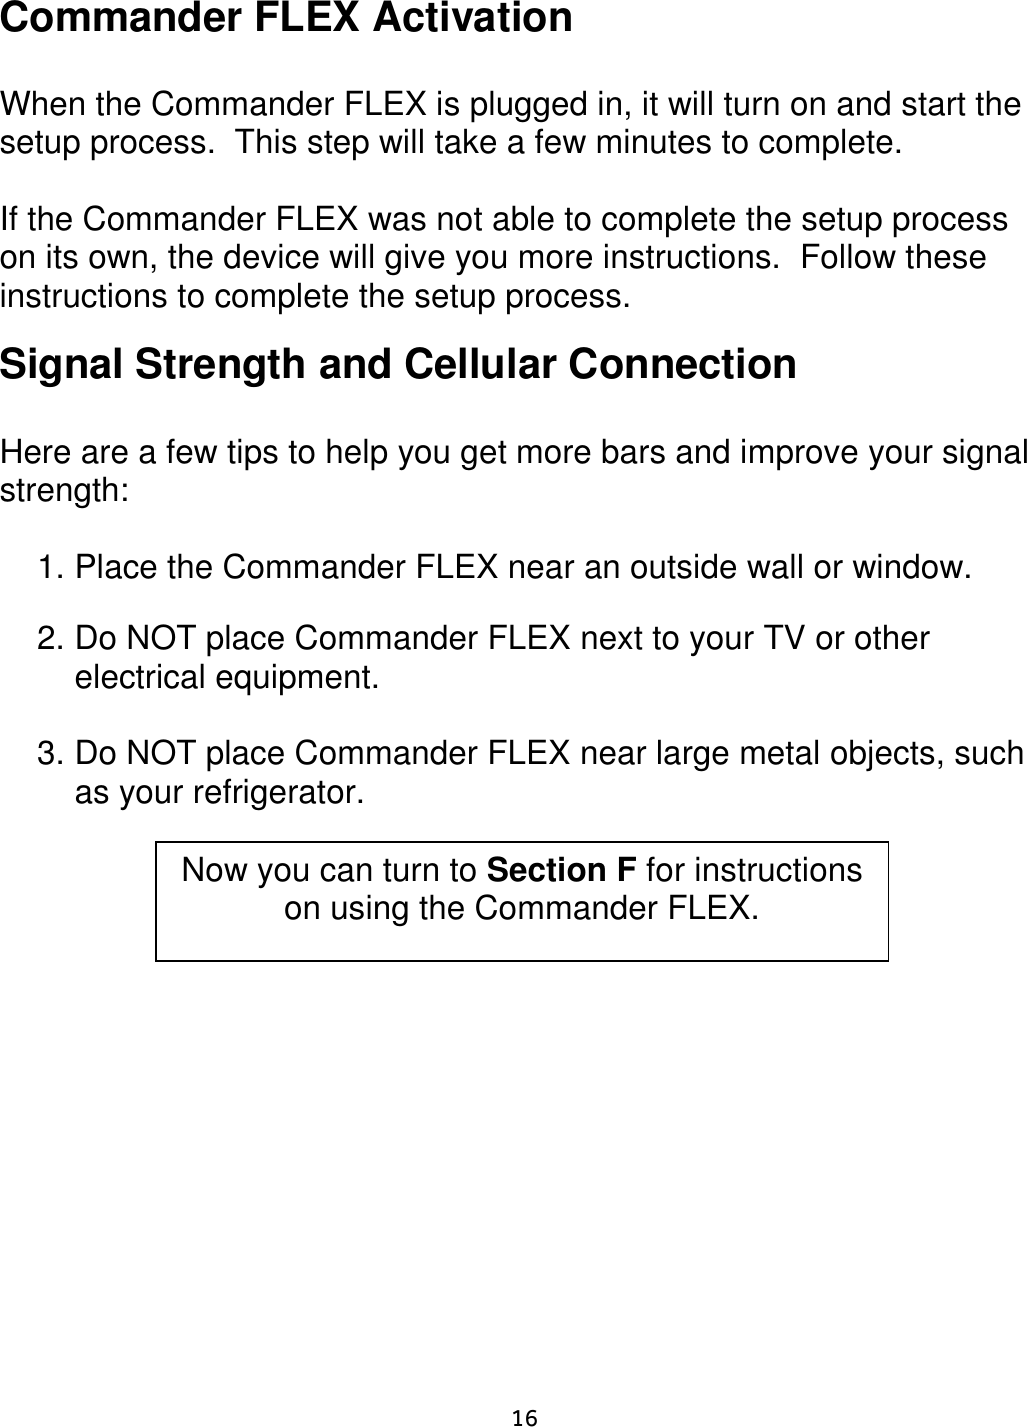     16  Commander FLEX Activation   When the Commander FLEX is plugged in, it will turn on and start the setup process.  This step will take a few minutes to complete.   If the Commander FLEX was not able to complete the setup process on its own, the device will give you more instructions.  Follow these instructions to complete the setup process.   Signal Strength and Cellular Connection  Here are a few tips to help you get more bars and improve your signal strength:  1. Place the Commander FLEX near an outside wall or window.  2. Do NOT place Commander FLEX next to your TV or other electrical equipment.    3. Do NOT place Commander FLEX near large metal objects, such as your refrigerator.      Now you can turn to Section F for instructions on using the Commander FLEX. 